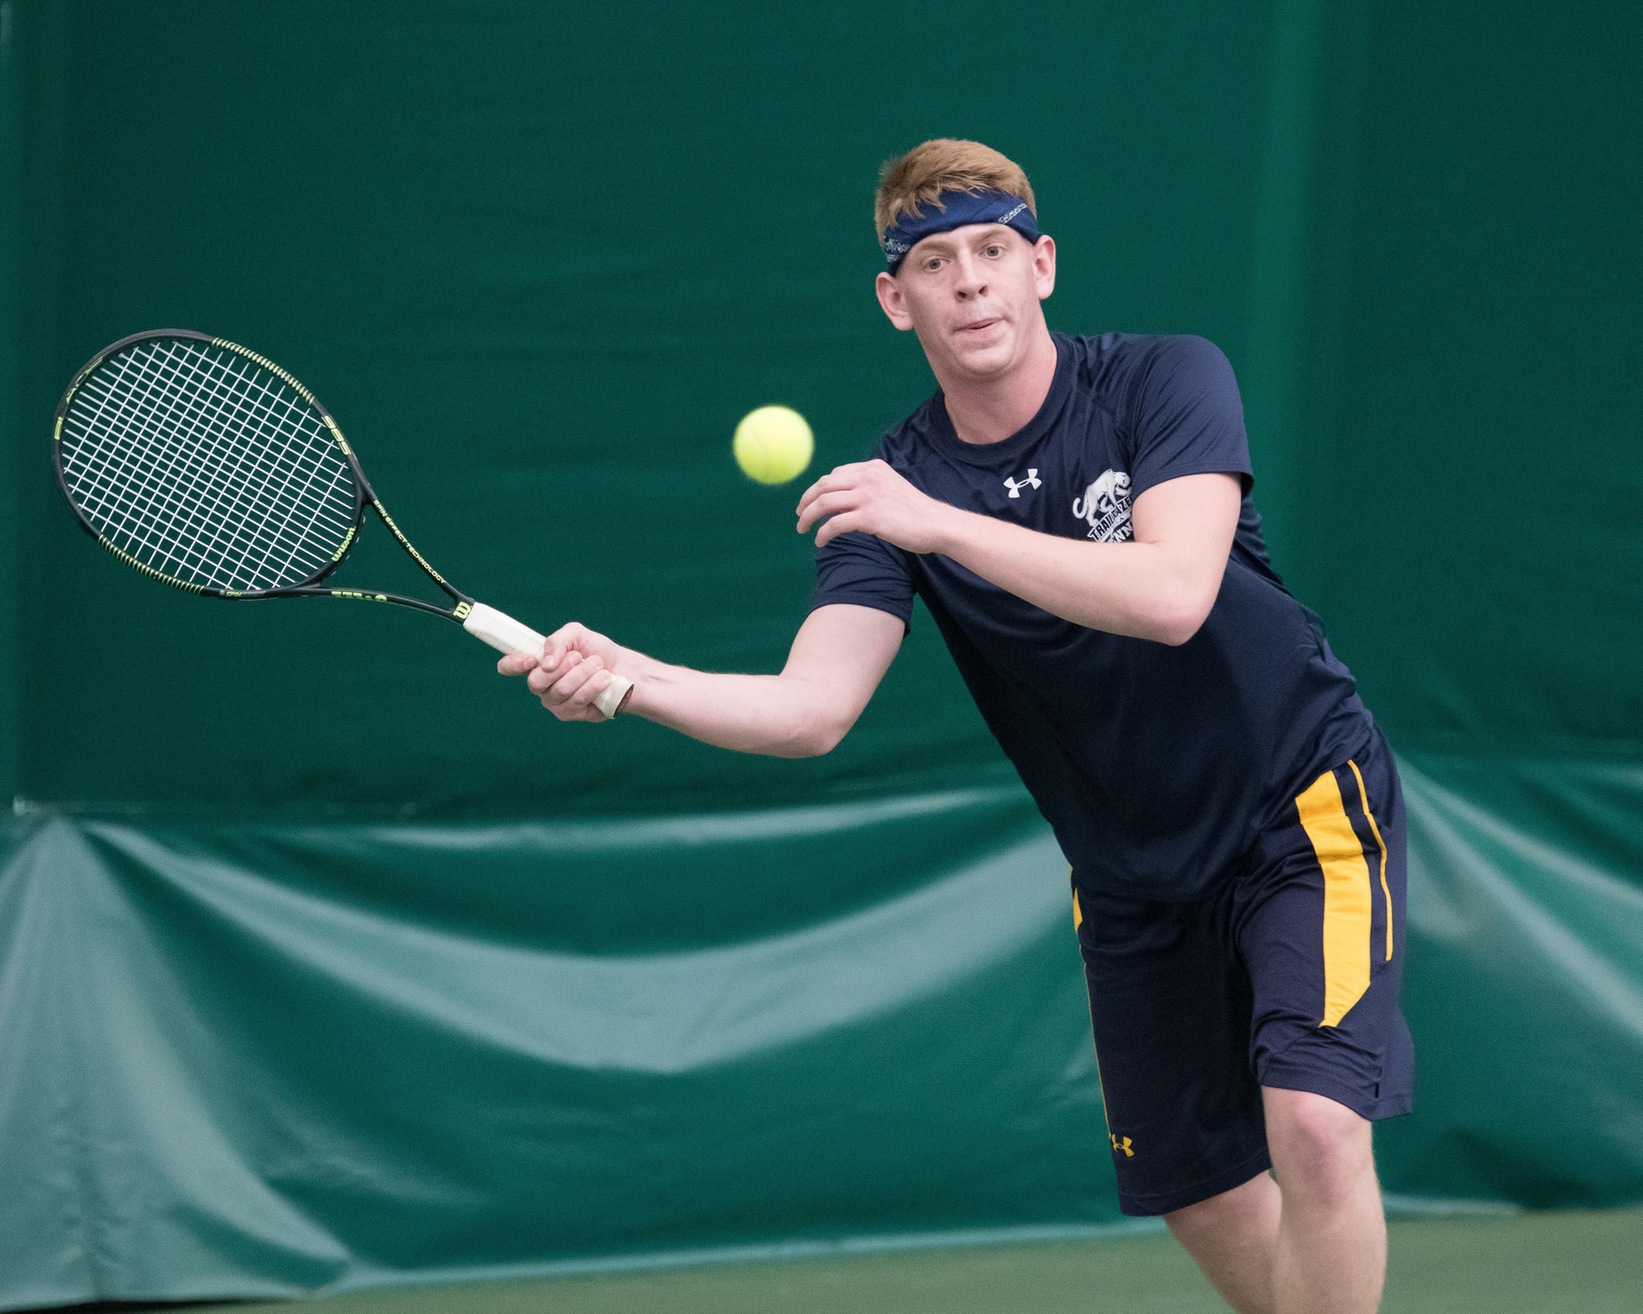 Tennis blanks Lyndon State 9-0 in non league matchup